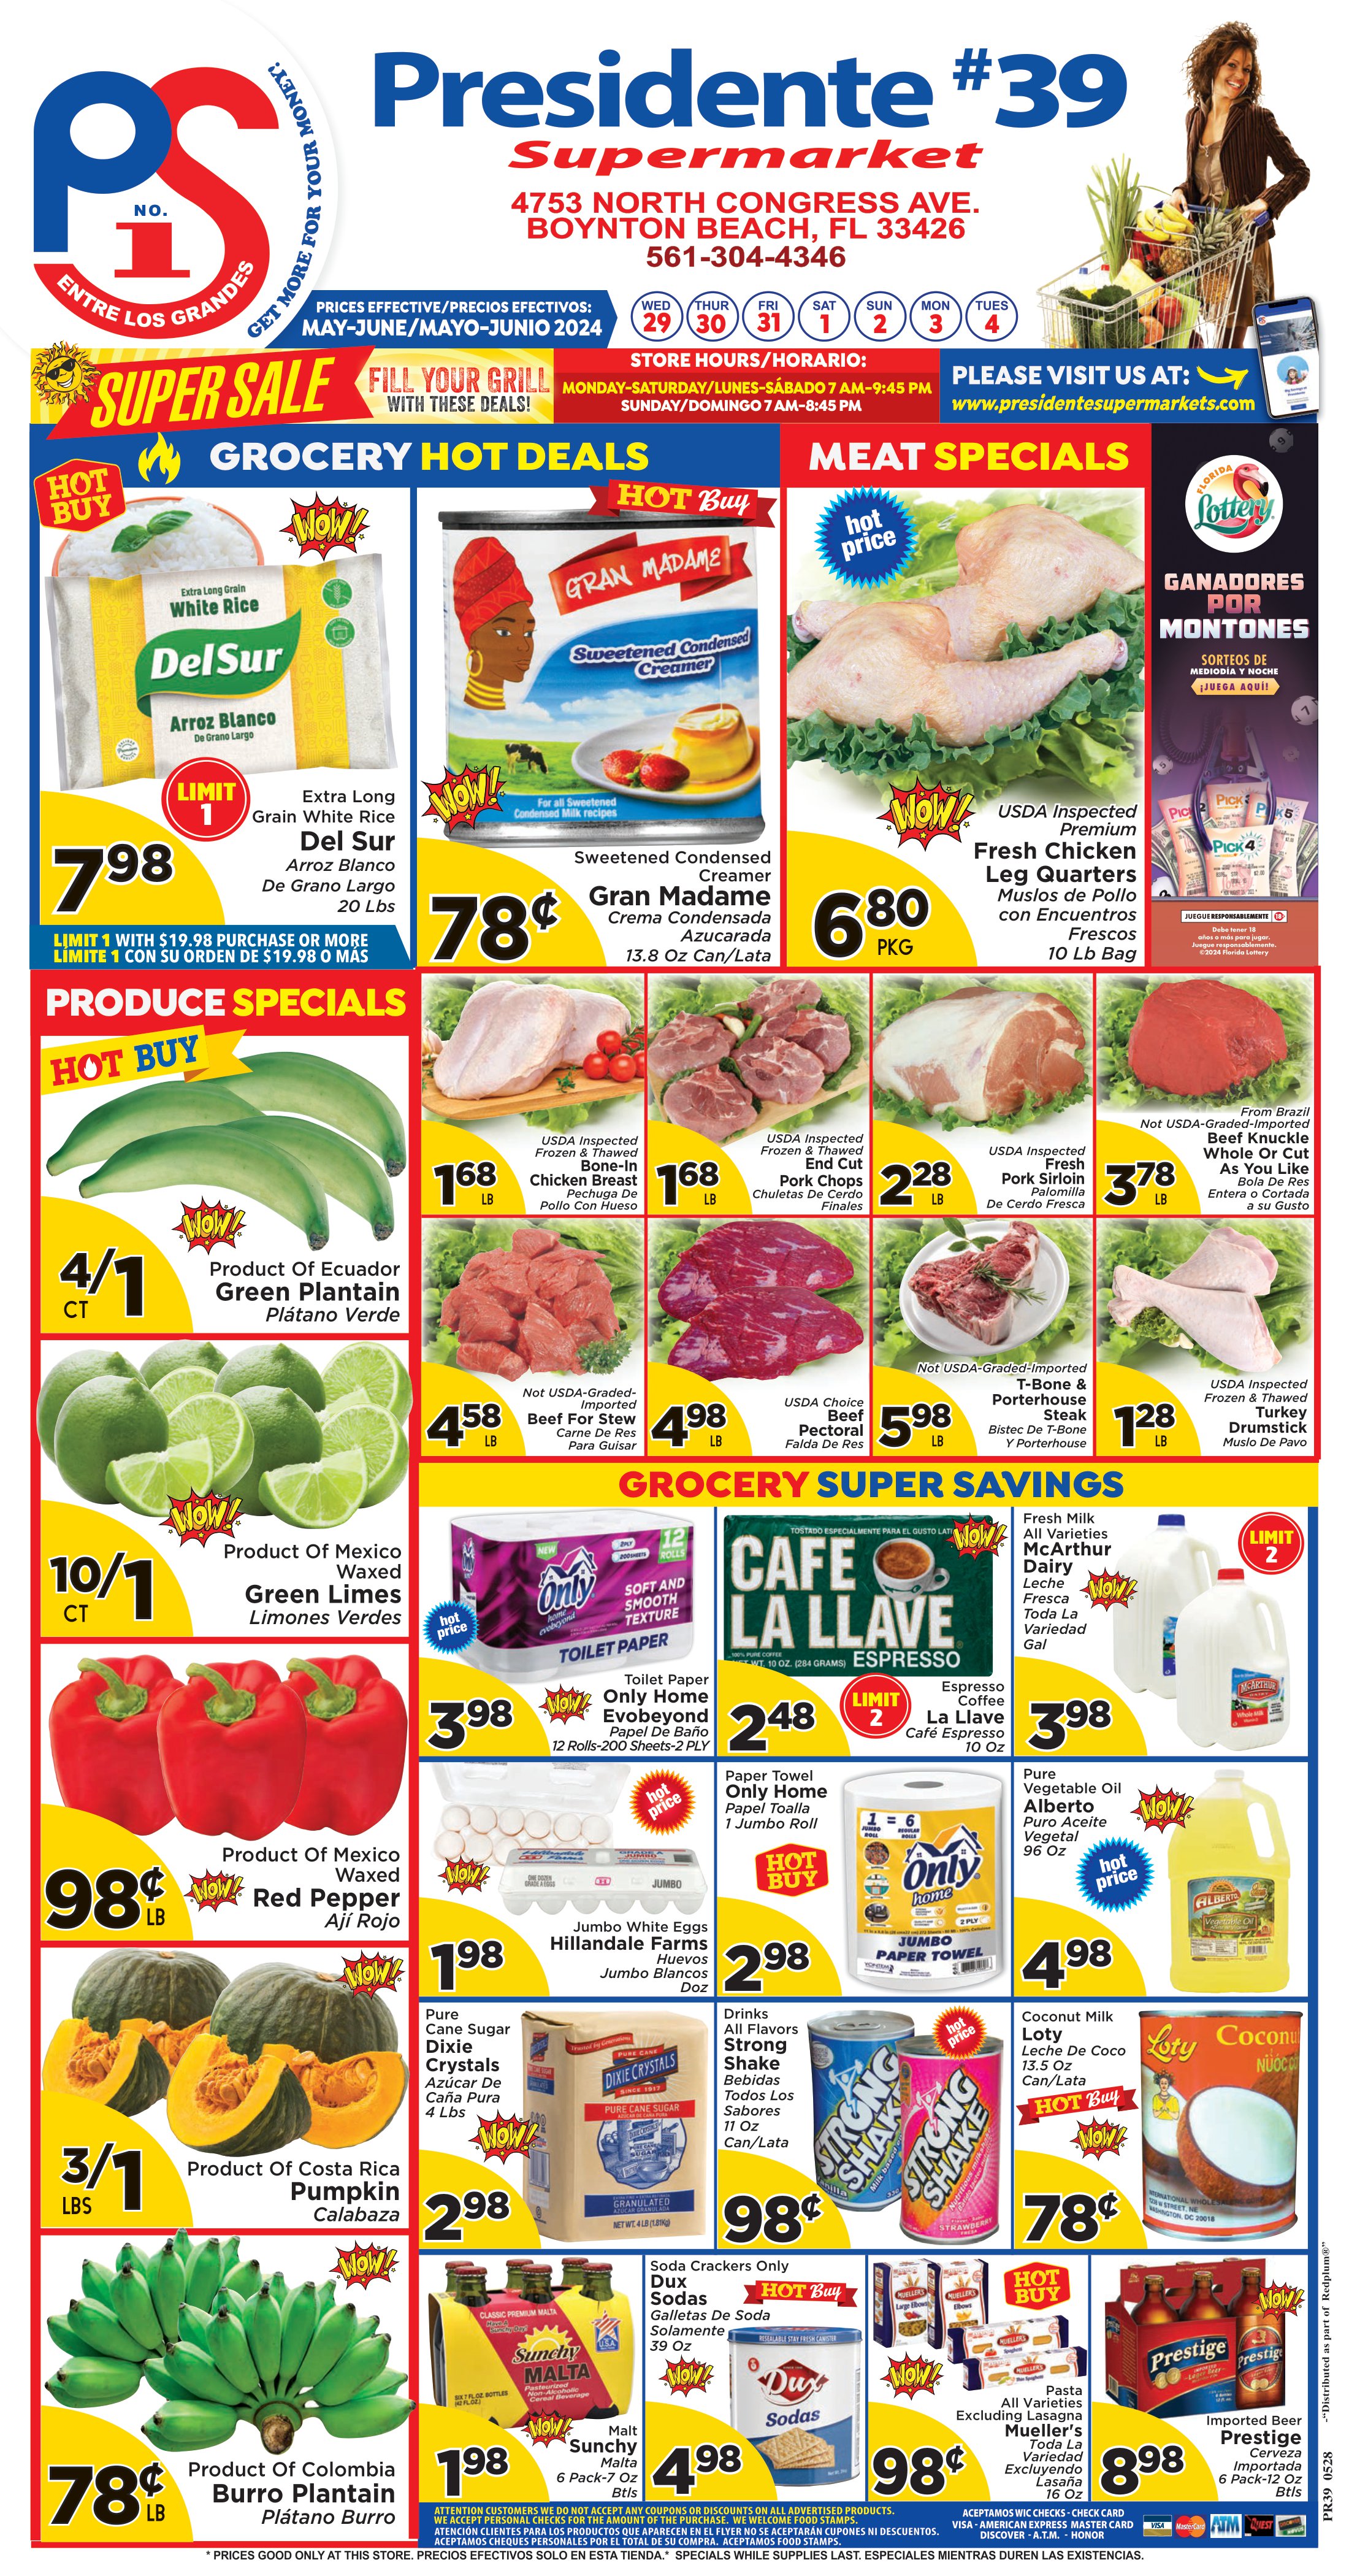 Presidente Supermarket - Weekly Promo for Store 39 Page 1